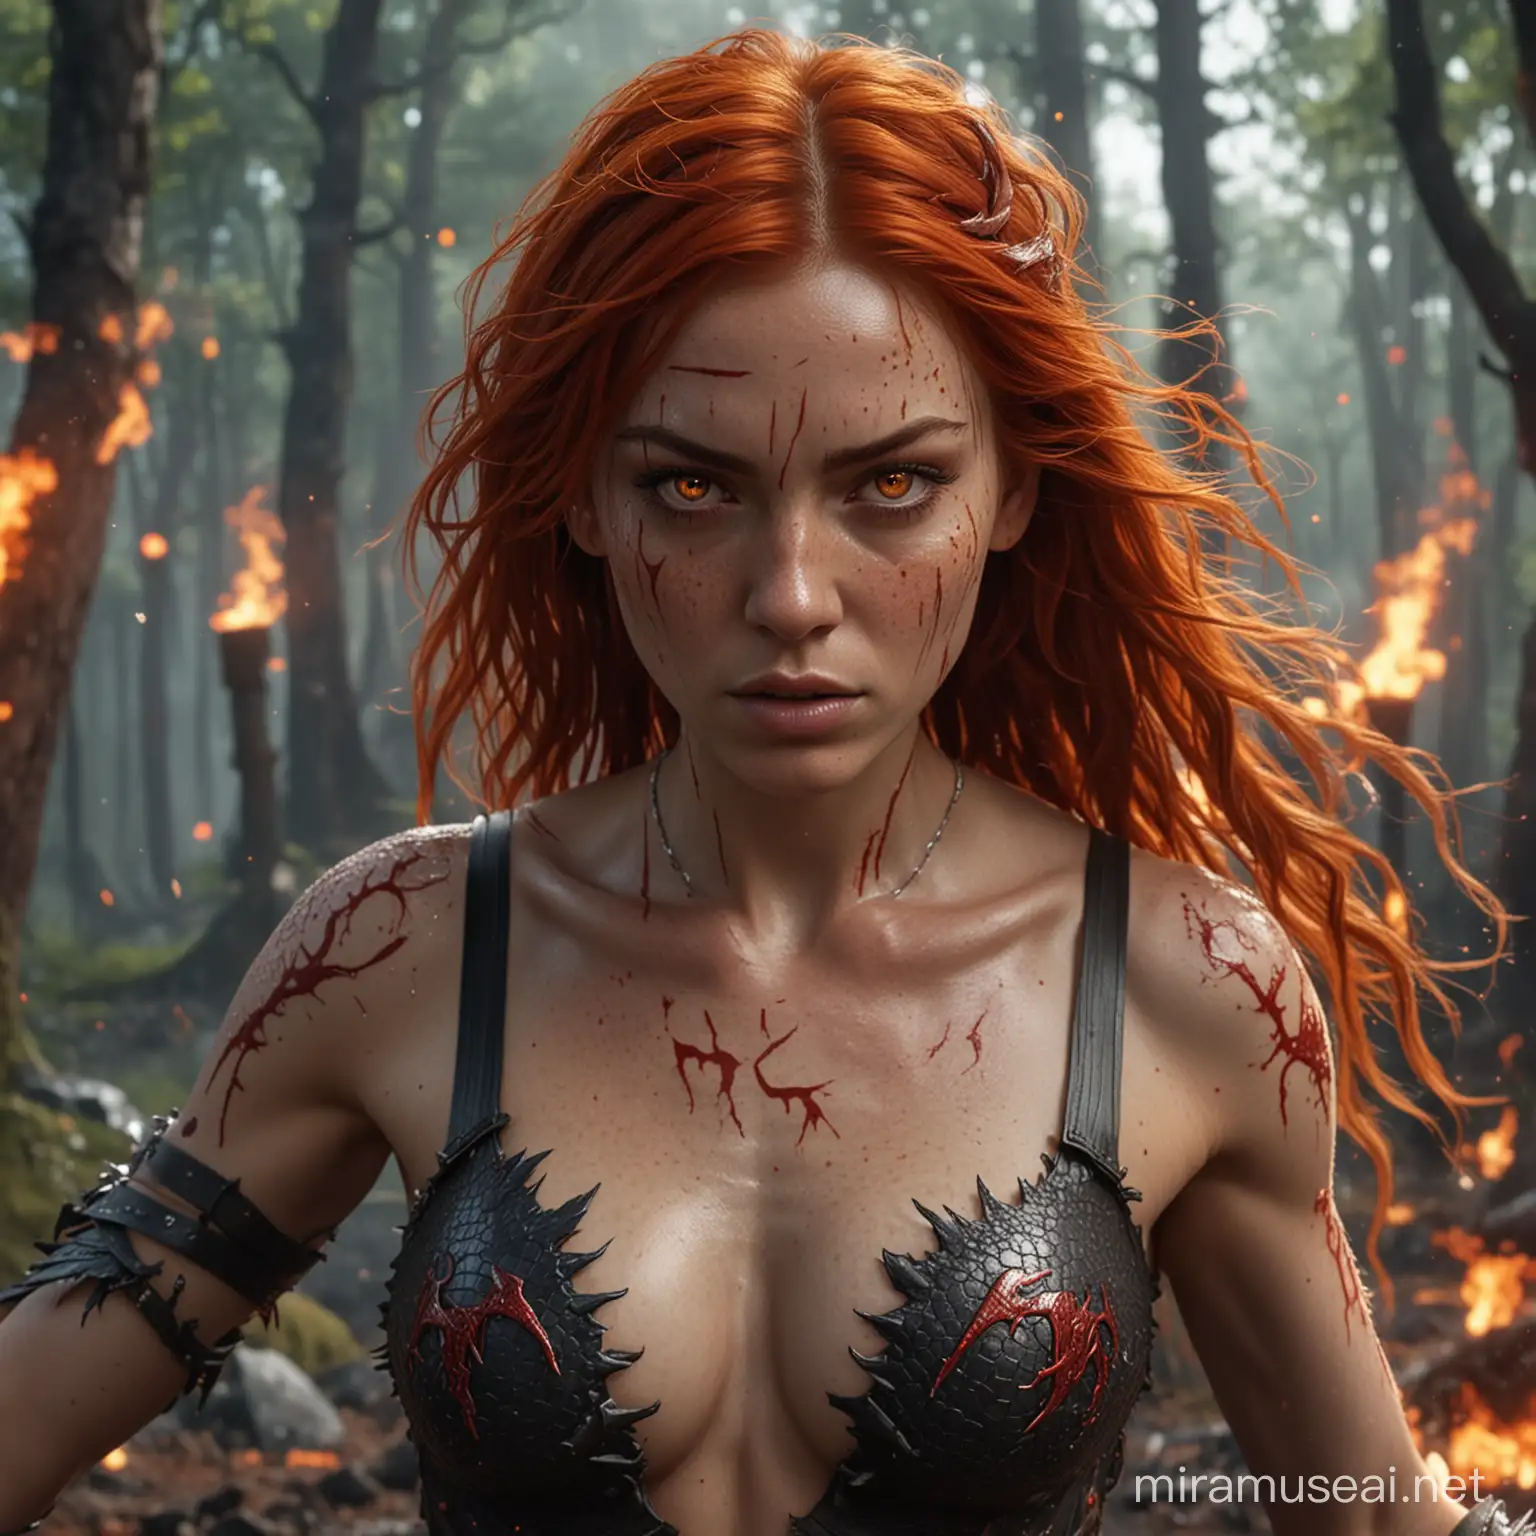 hyperrealistic very high detail 4k full size photograph taken from the front left with depth perception, showing a female human with long fiery red hair thin red eyebrows, burning red eyes and face full of freckles, with draconic symbols carved into arms and body, sleeveless open front top made of dragon scales, fighting in a bloody battle in a forest, with bolts of lightning from hands